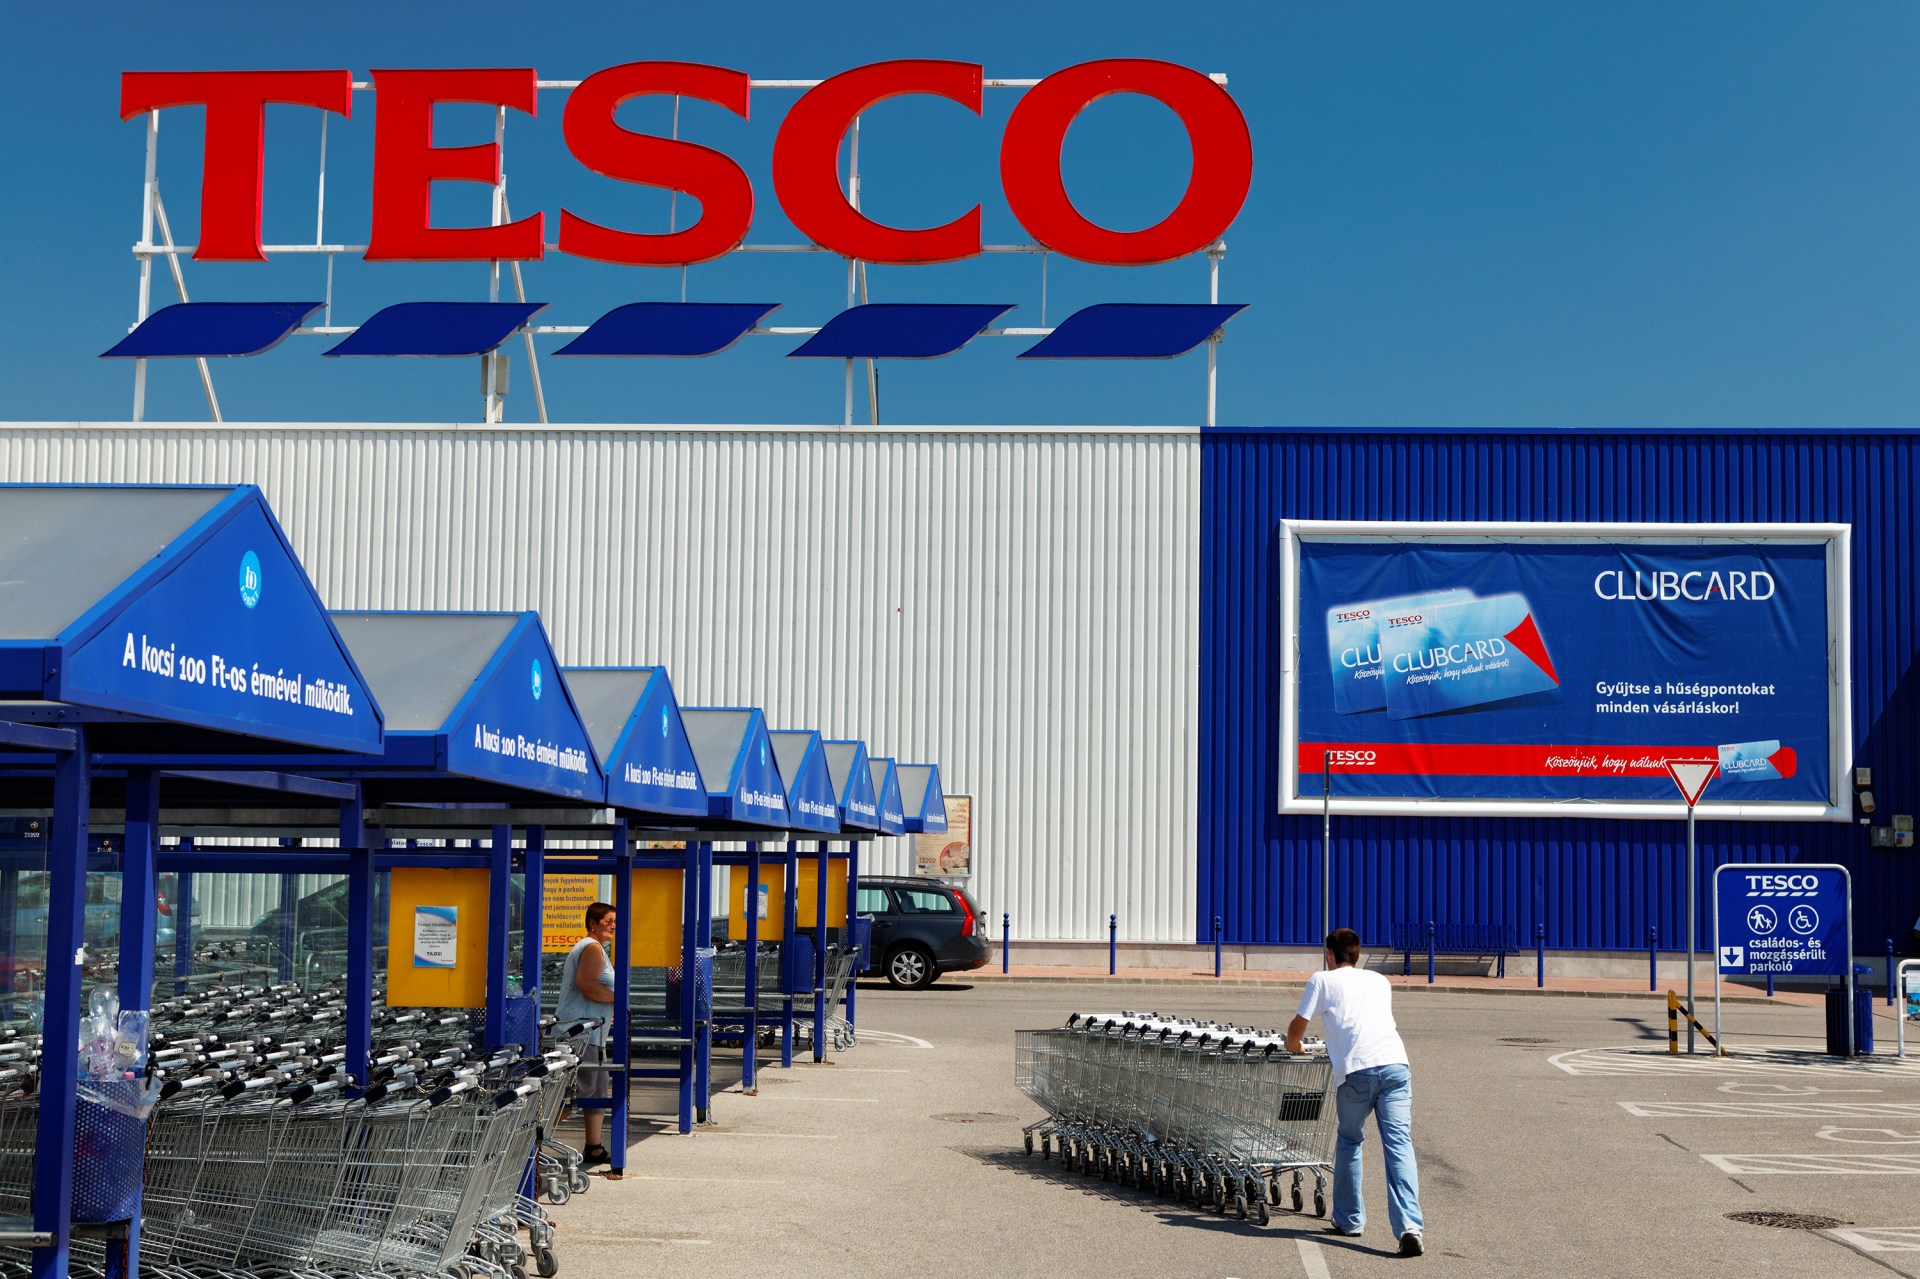 tesco announces £100,000 worth of clubcard points to be claimed this month